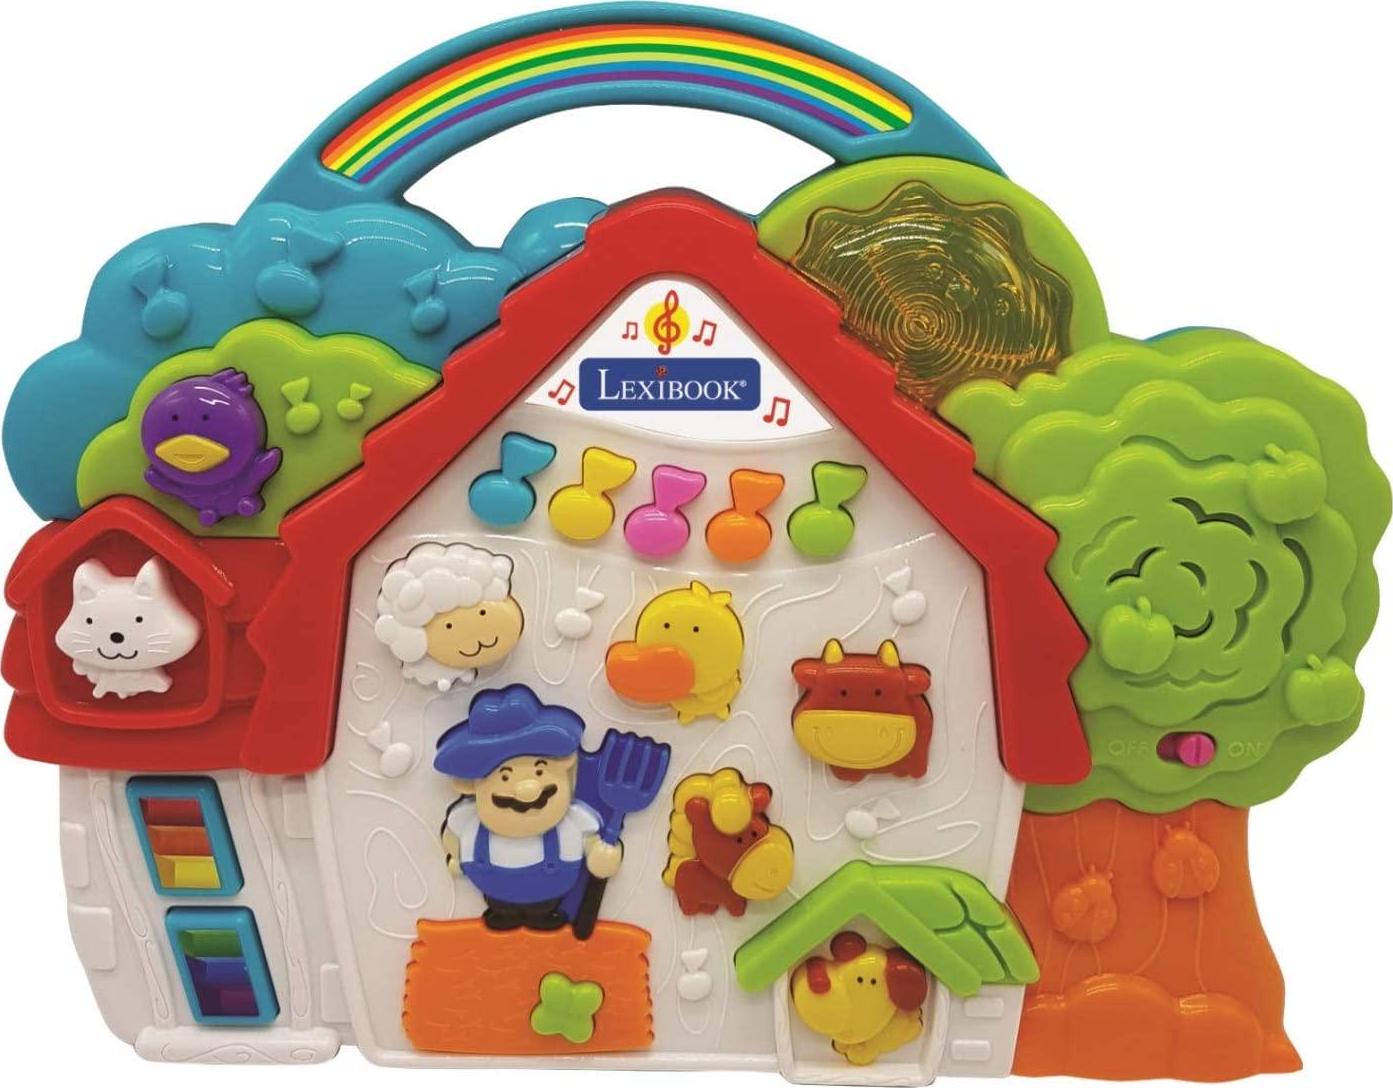 Lexibook, Lexibook PS505 Farm, Preschool Educational Electronic Toy for Kids Children, Discover Animals in Music, Light Effects and Songs, Multicolor